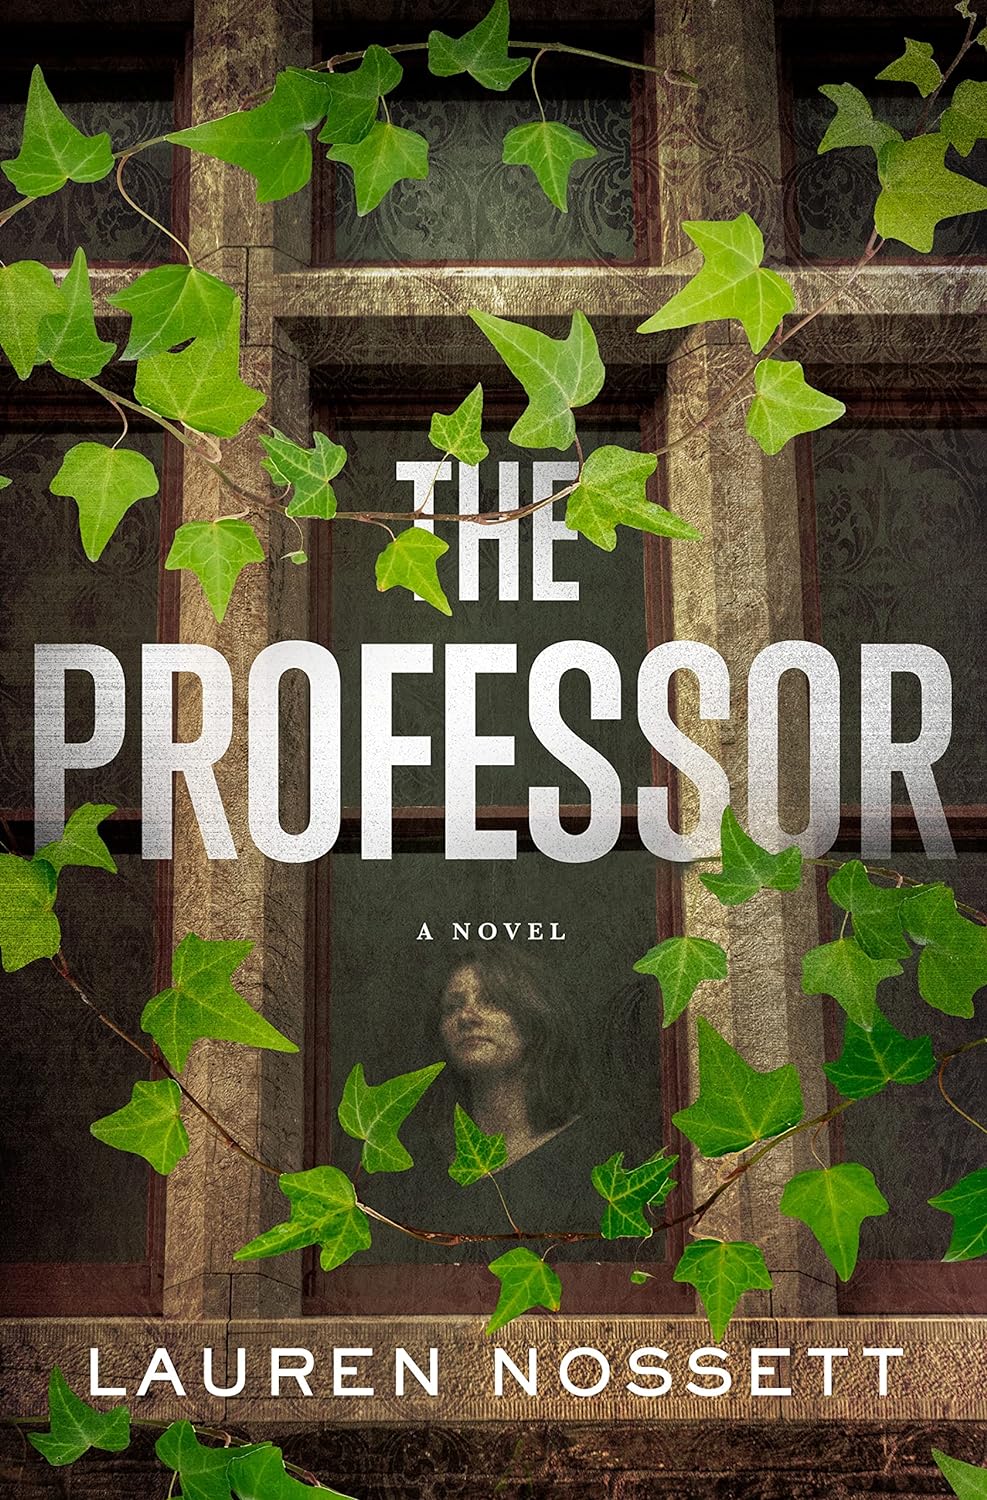 Image for "The Professor"